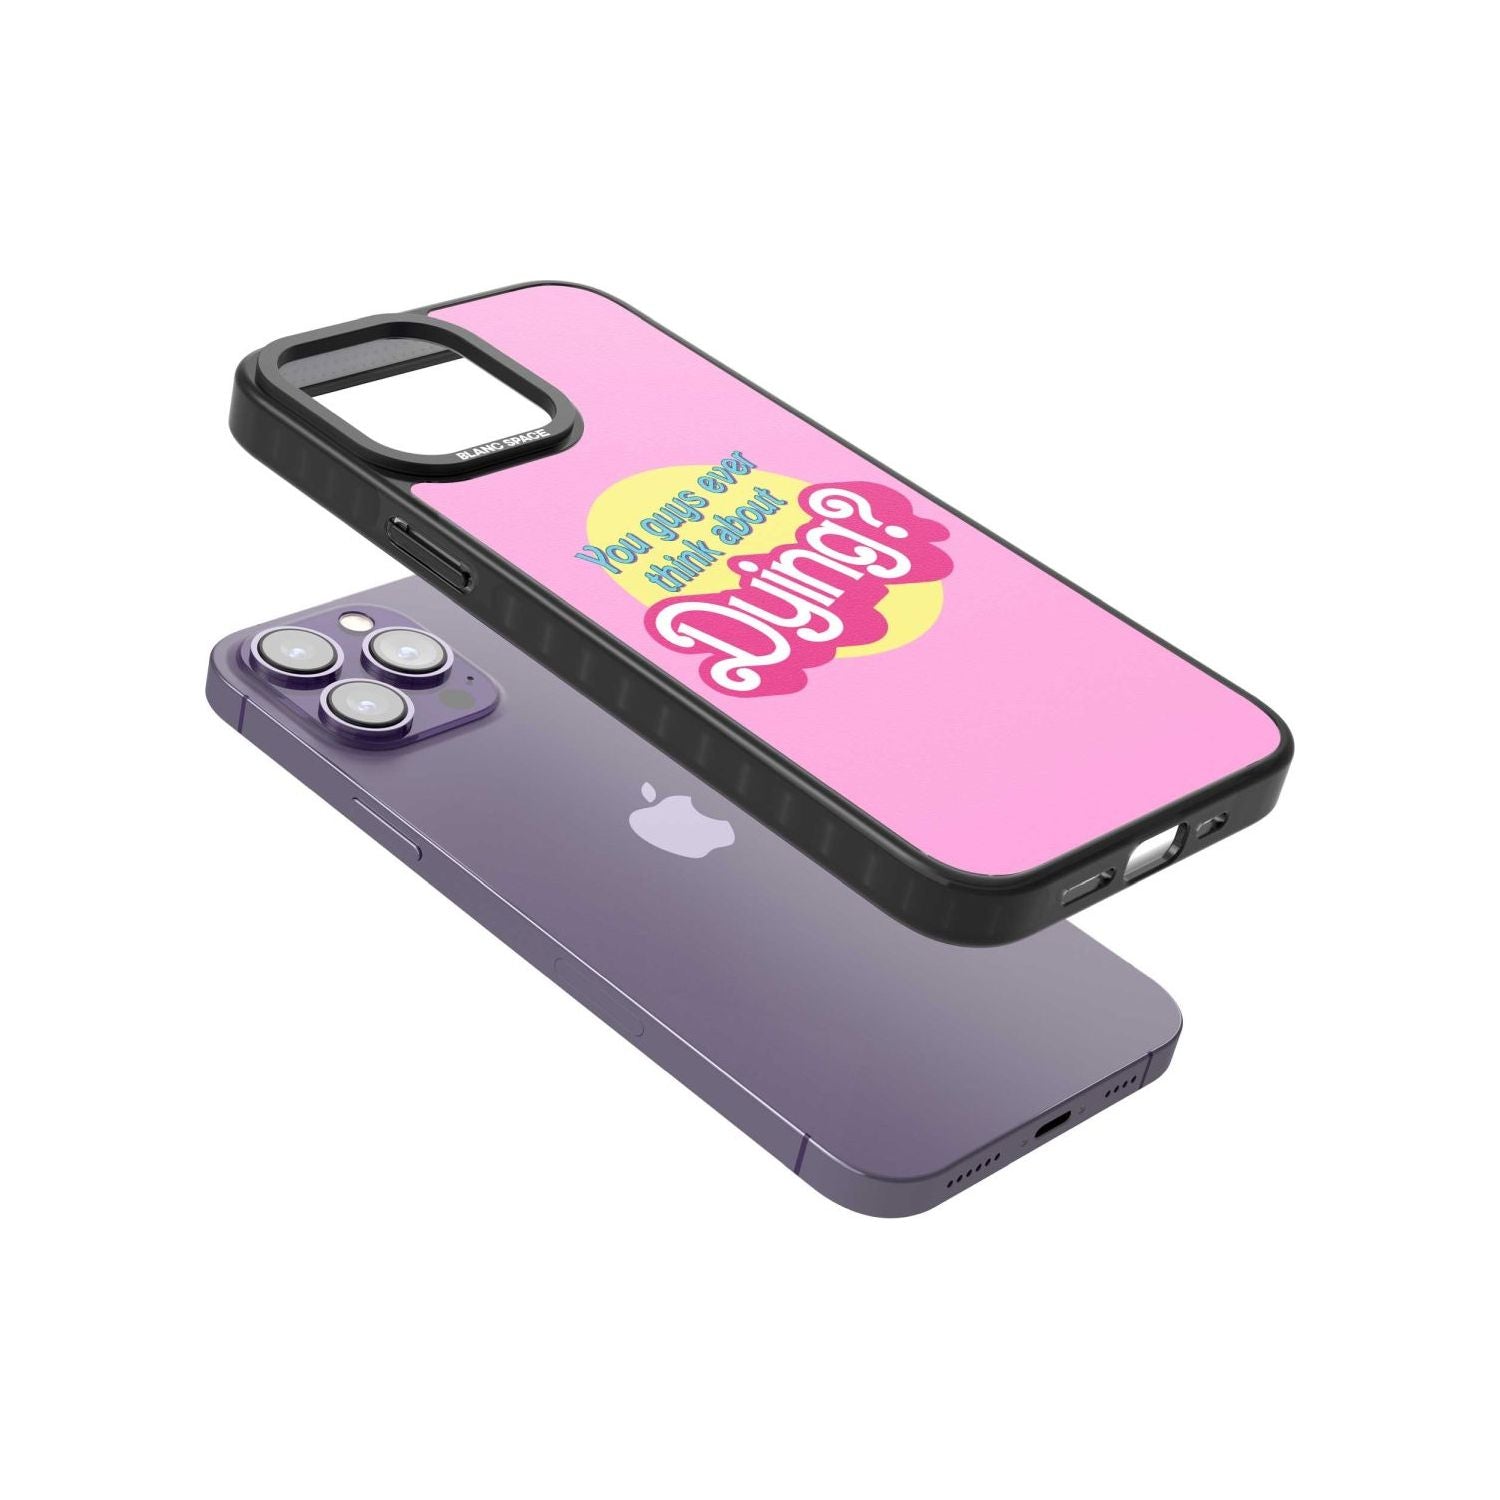 Ever Think About Dying? Phone Case iPhone 15 Pro Max / Black Impact Case,iPhone 15 Plus / Black Impact Case,iPhone 15 Pro / Black Impact Case,iPhone 15 / Black Impact Case,iPhone 15 Pro Max / Impact Case,iPhone 15 Plus / Impact Case,iPhone 15 Pro / Impact Case,iPhone 15 / Impact Case,iPhone 15 Pro Max / Magsafe Black Impact Case,iPhone 15 Plus / Magsafe Black Impact Case,iPhone 15 Pro / Magsafe Black Impact Case,iPhone 15 / Magsafe Black Impact Case,iPhone 14 Pro Max / Black Impact Case,iPhone 14 Plus / Bla